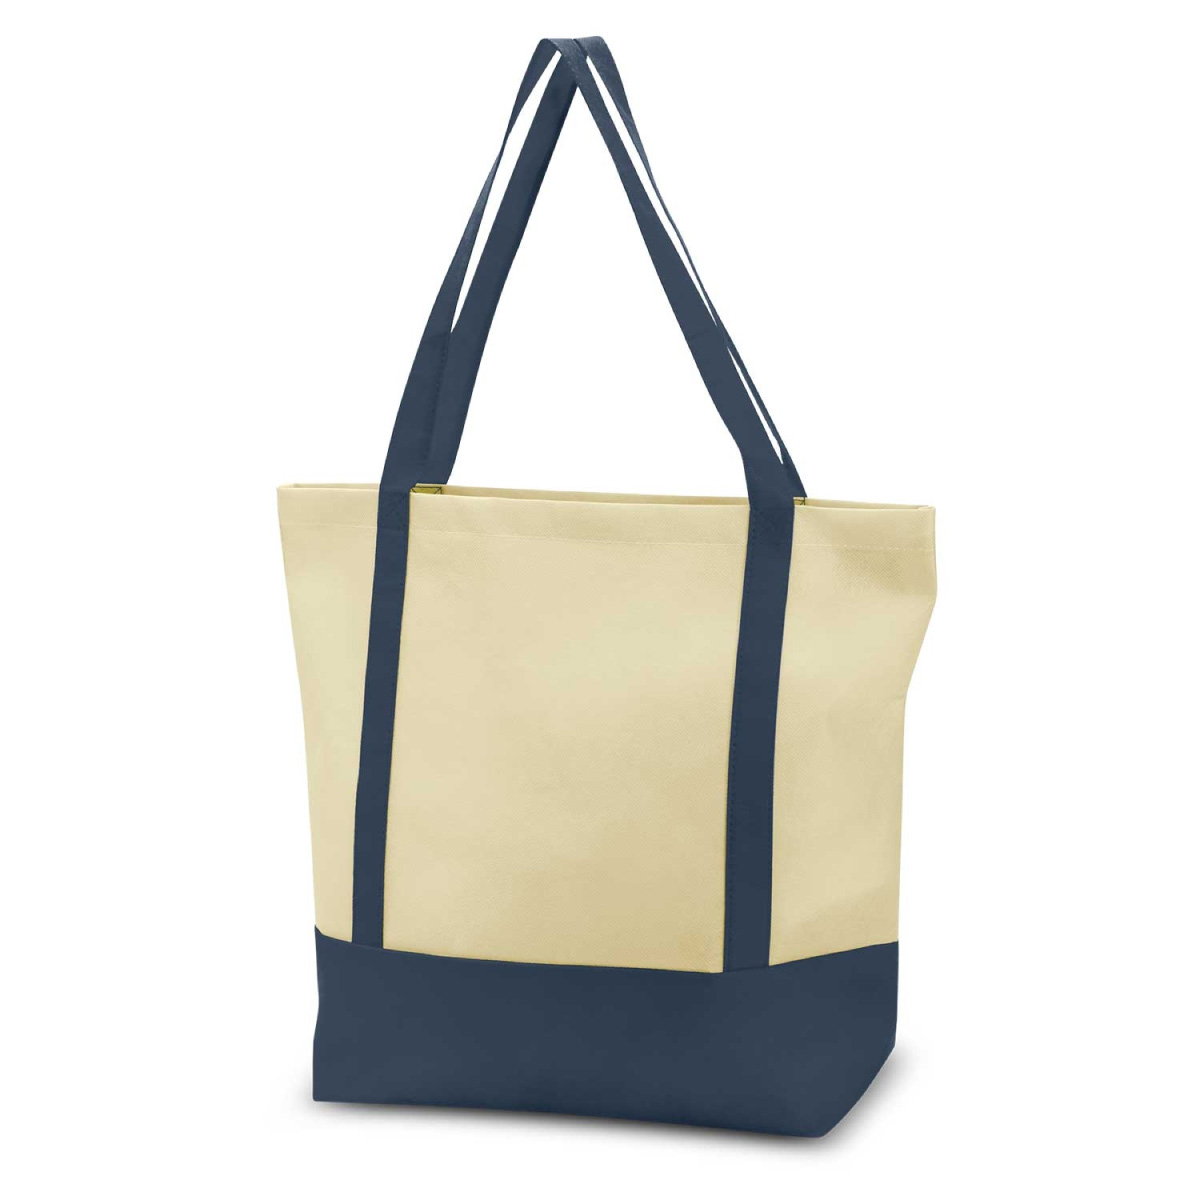 Promotional Tirano Tote Bags | Promotion Products